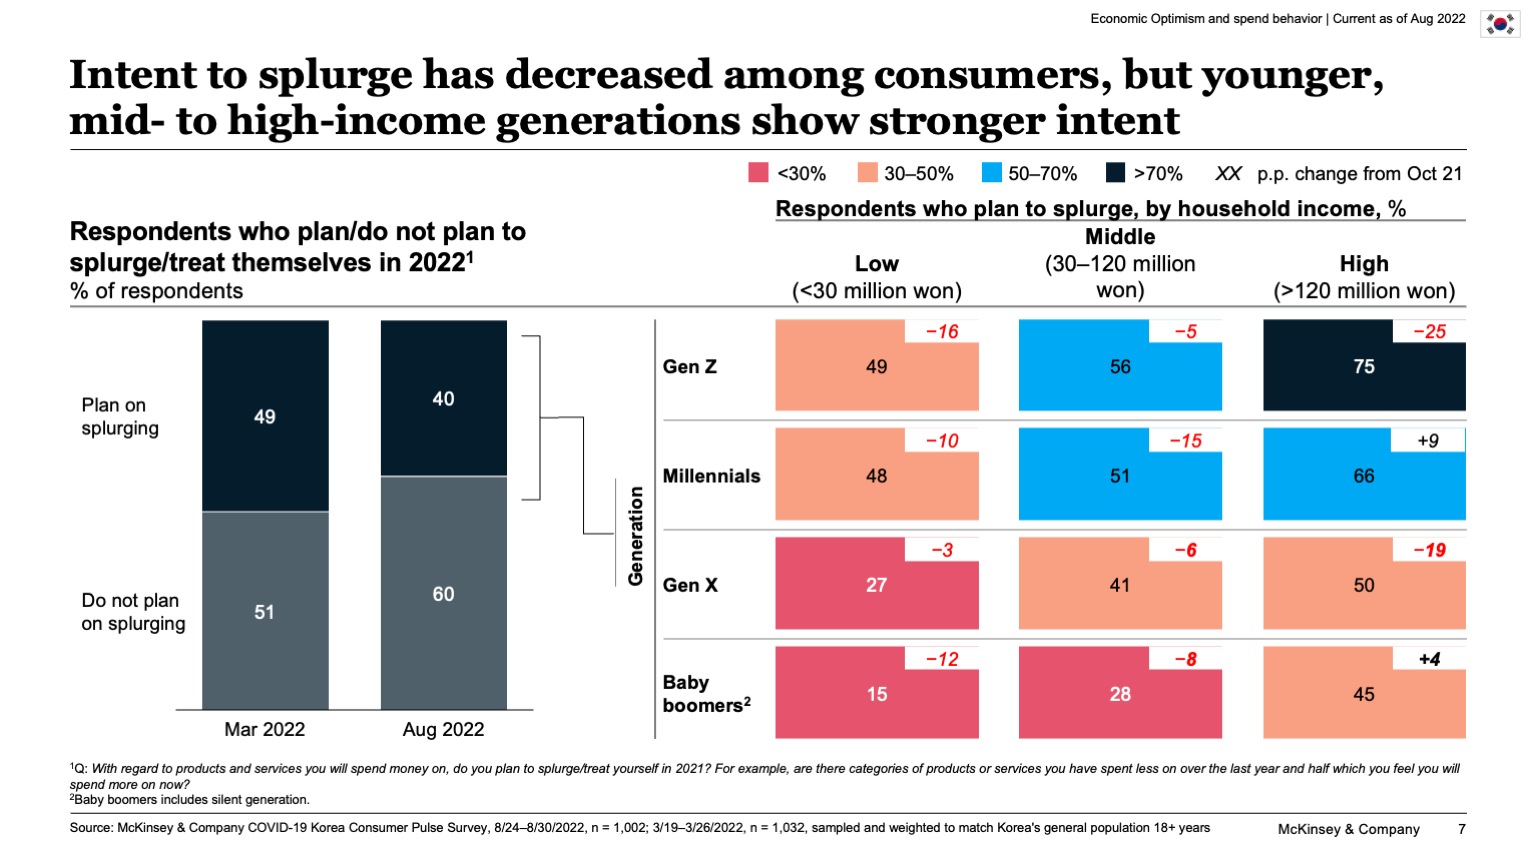 Intent to splurge has decreased among consumers, but younger, mid- to high-income generations show stronger intent